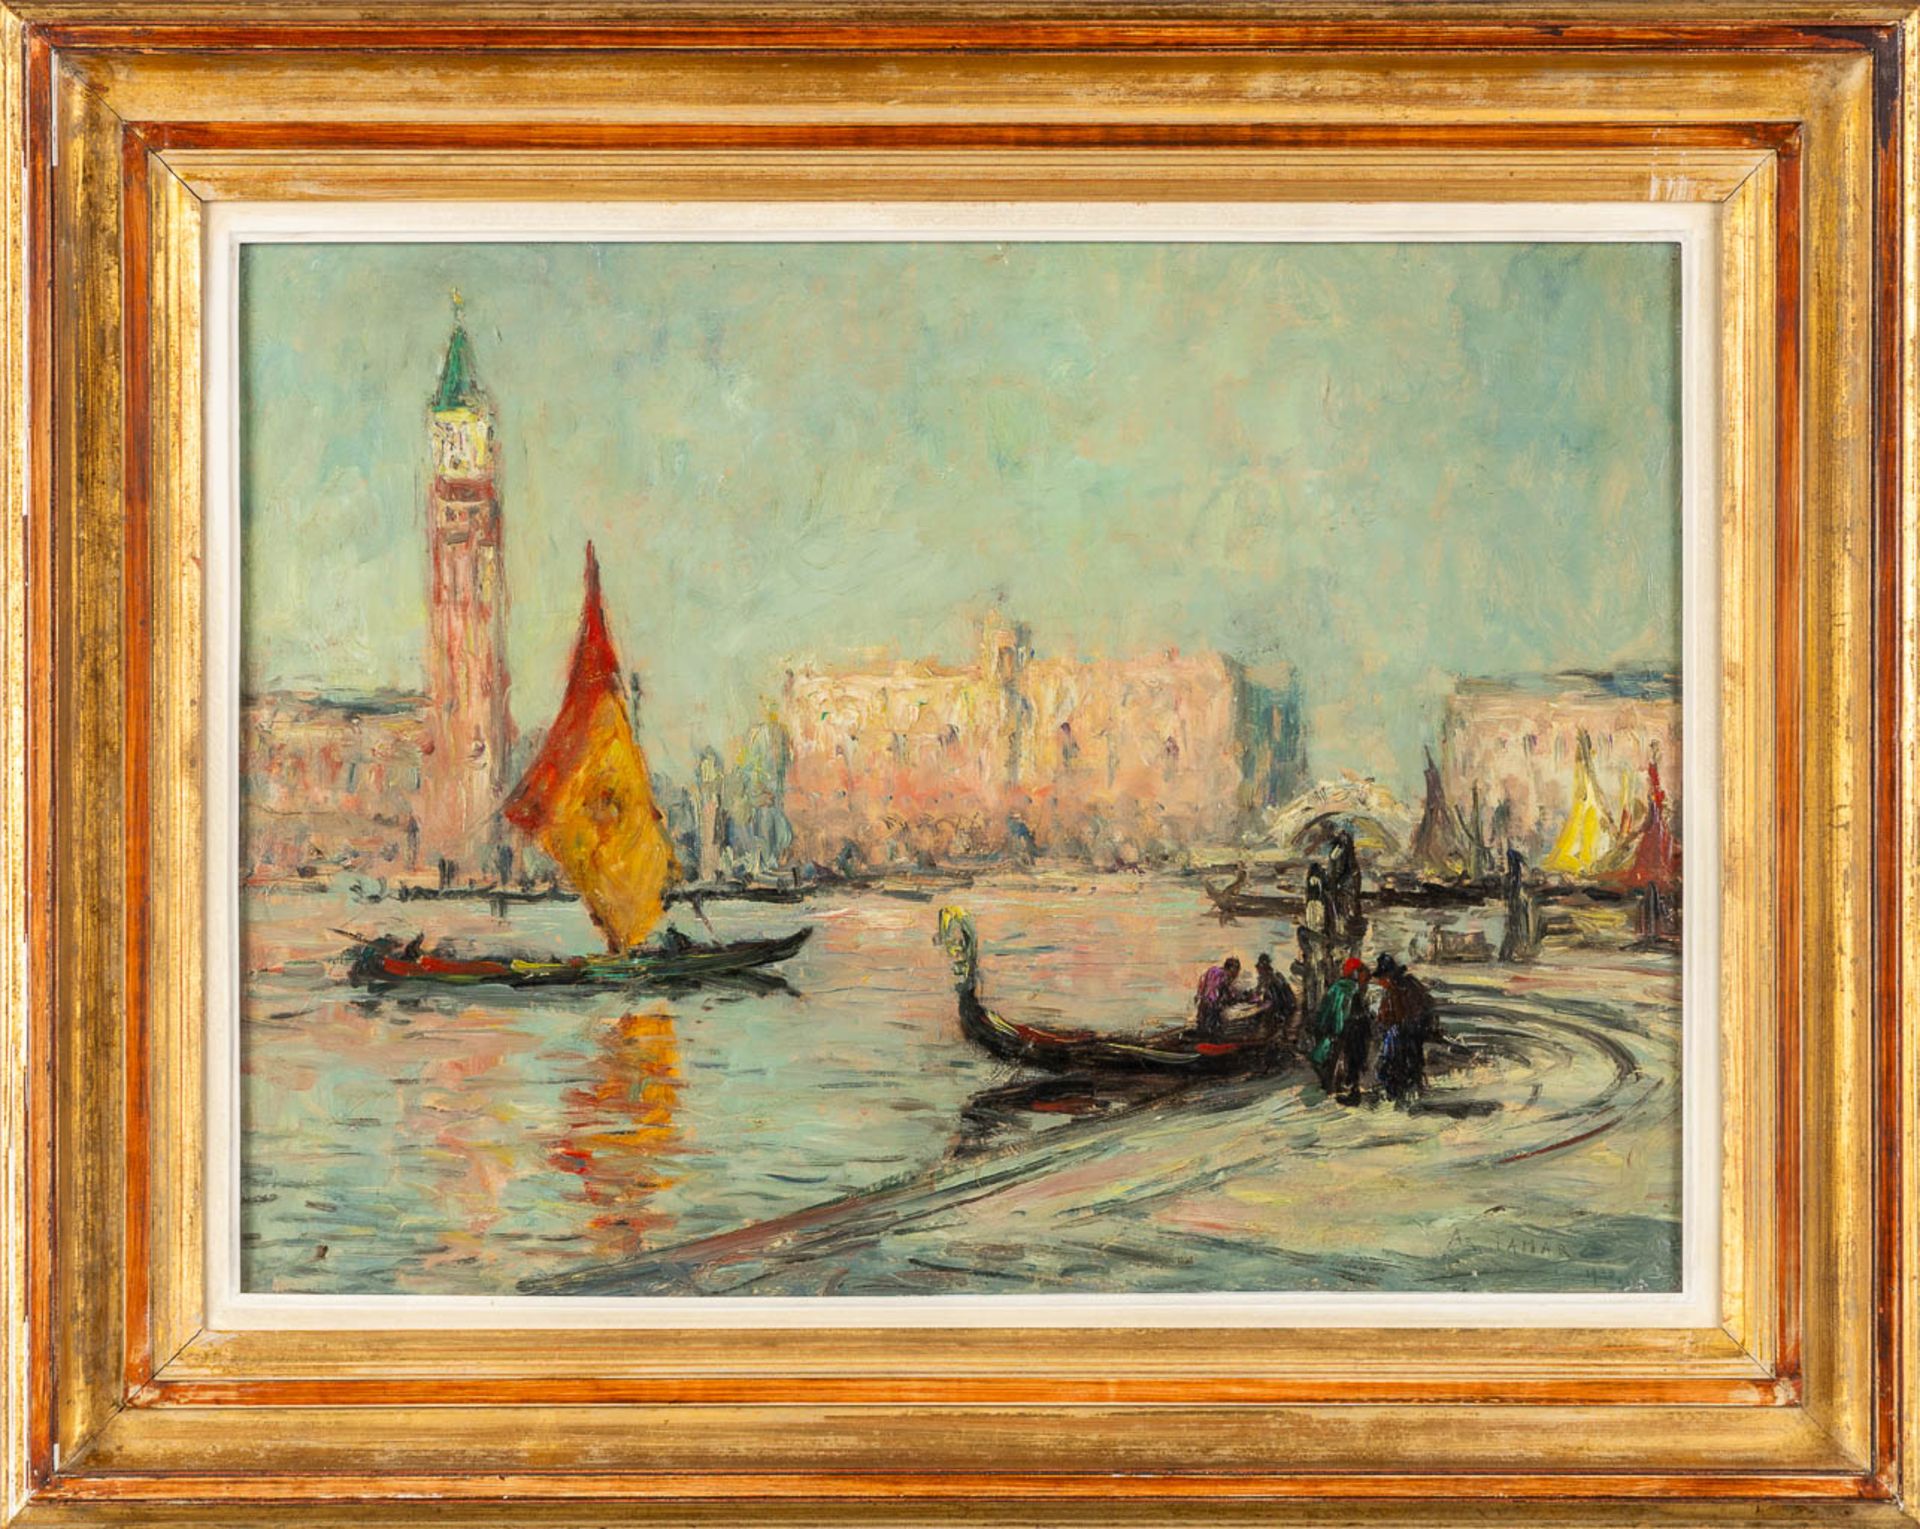 Armand JAMAR (1870-1946) 'View on Venice, Italy' 1930. (W:75 x H:55 cm) - Image 3 of 7